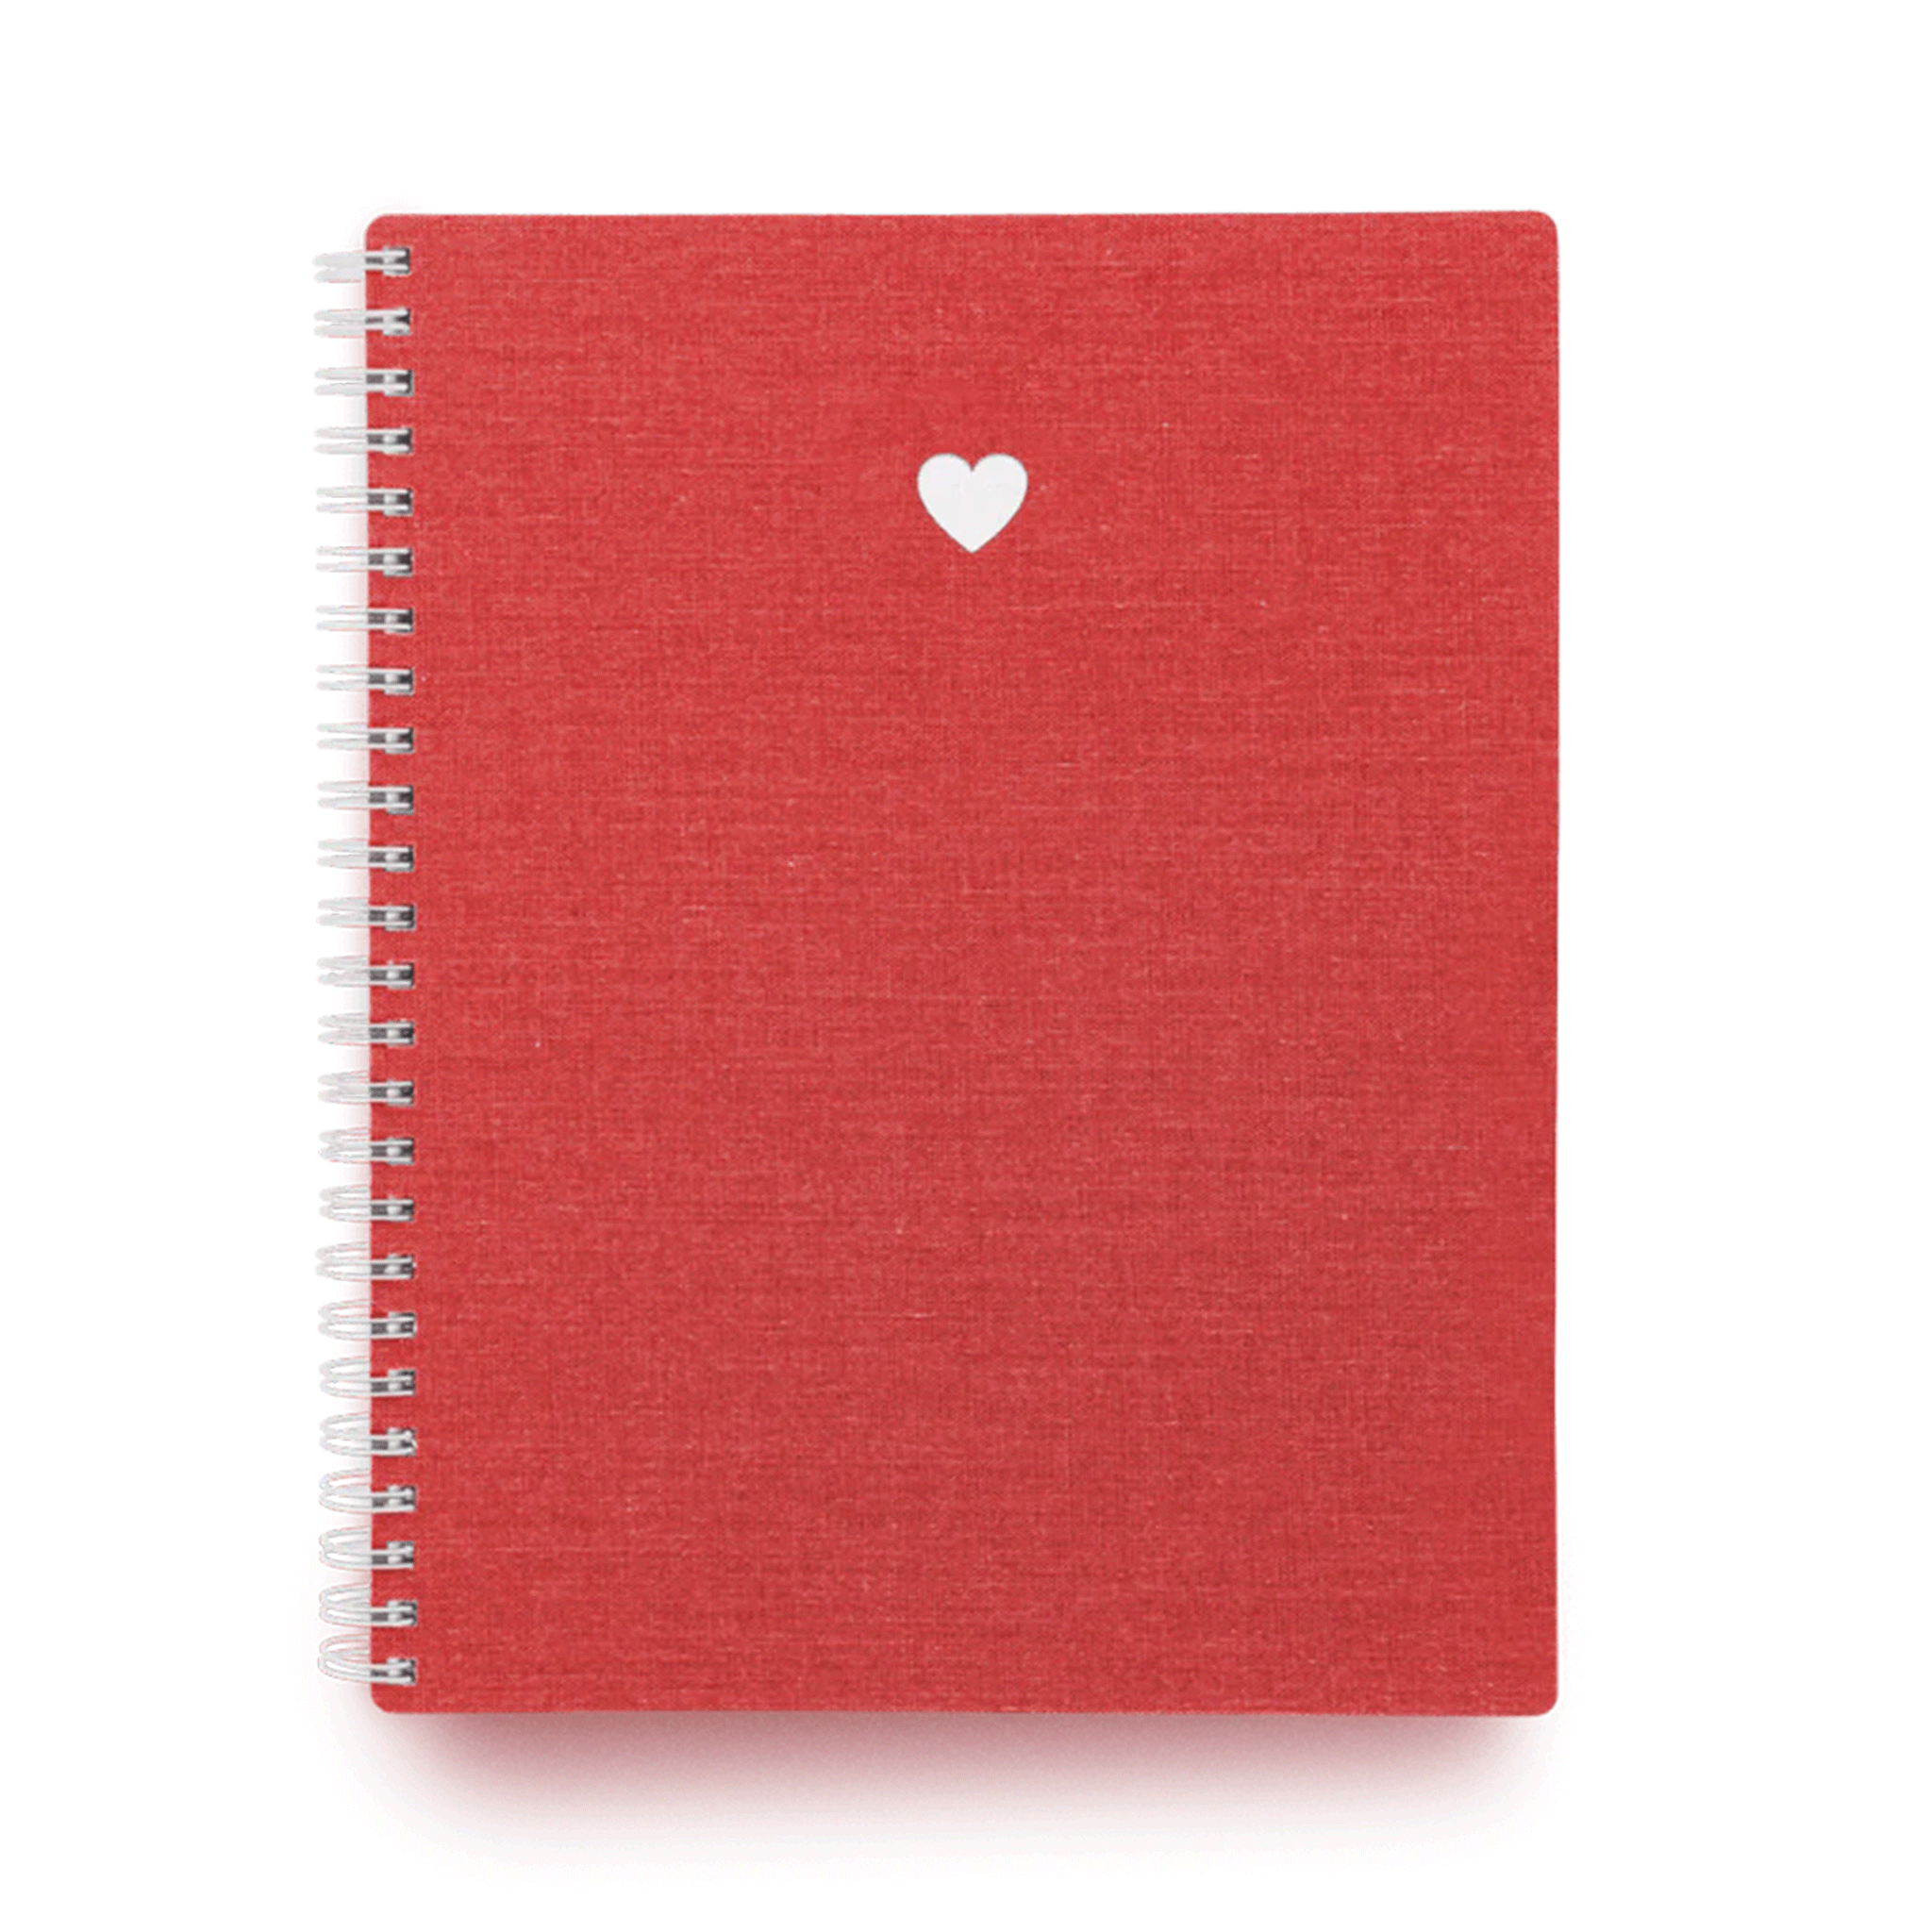 On a white background is a red note book that is white spiral bound and a heart in the center of the front cover. 